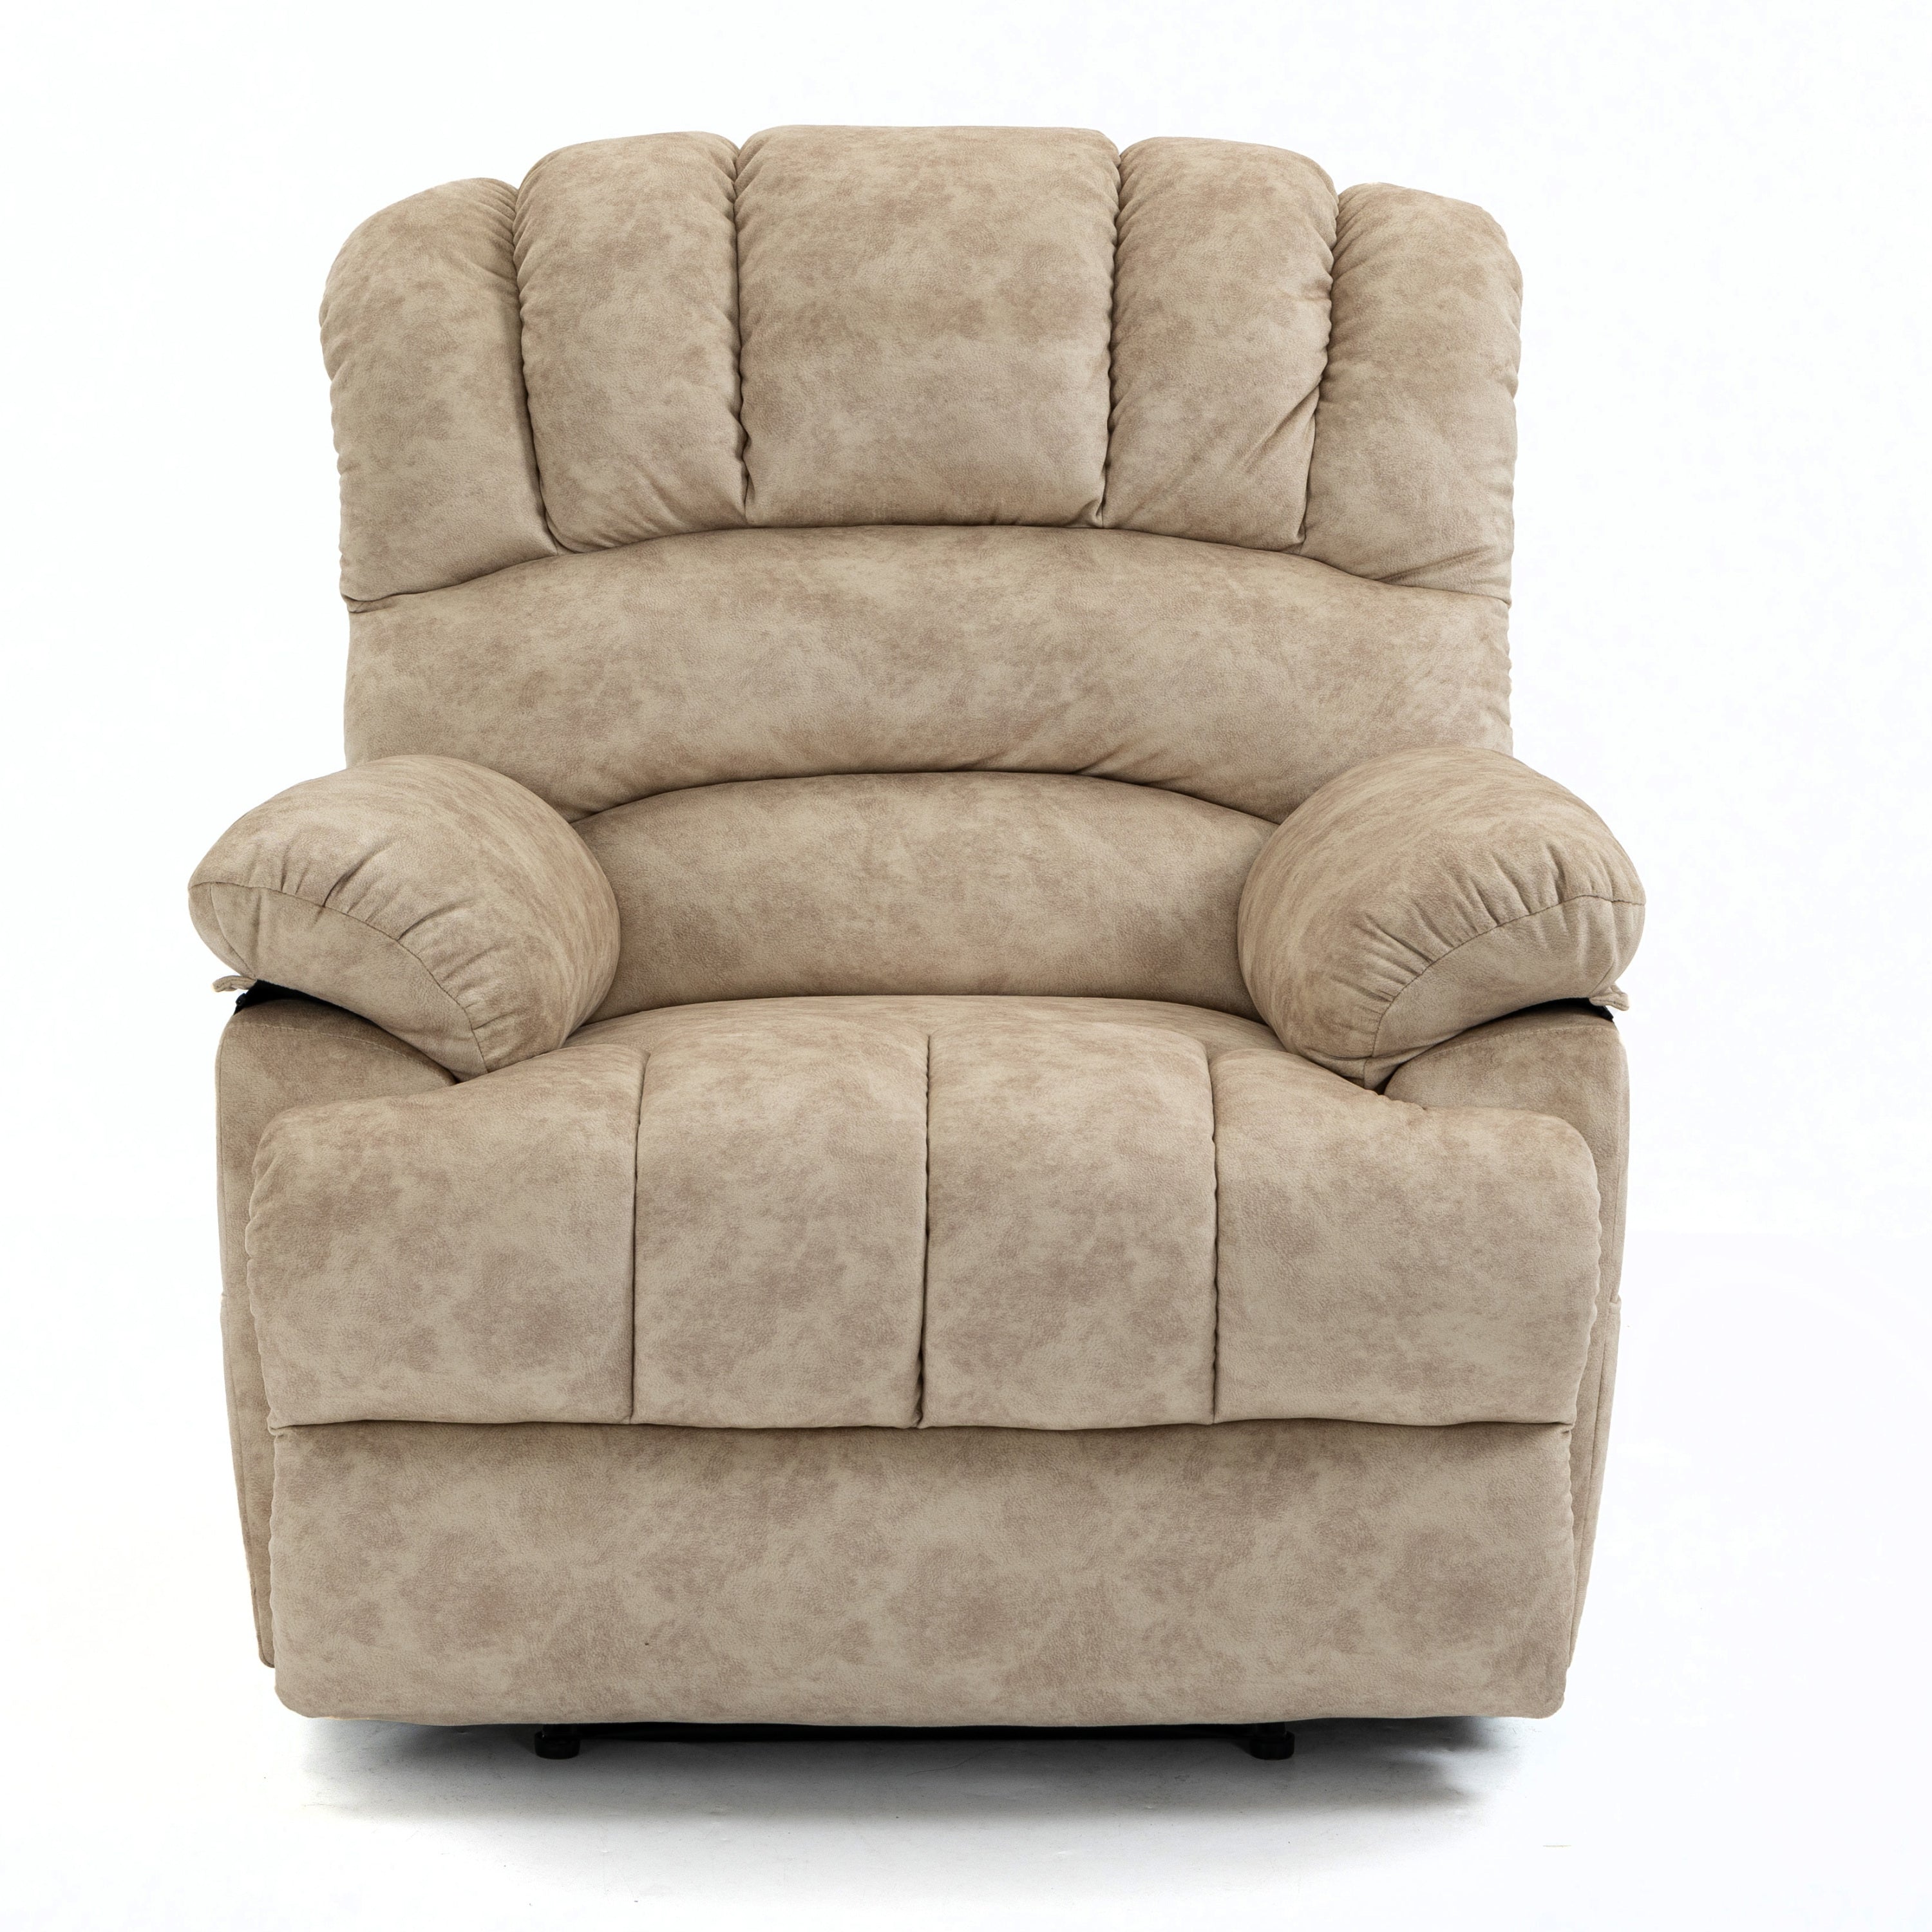 🆓🚛 Large Manual Recliner Chair In Fabric for Living Room, Beige